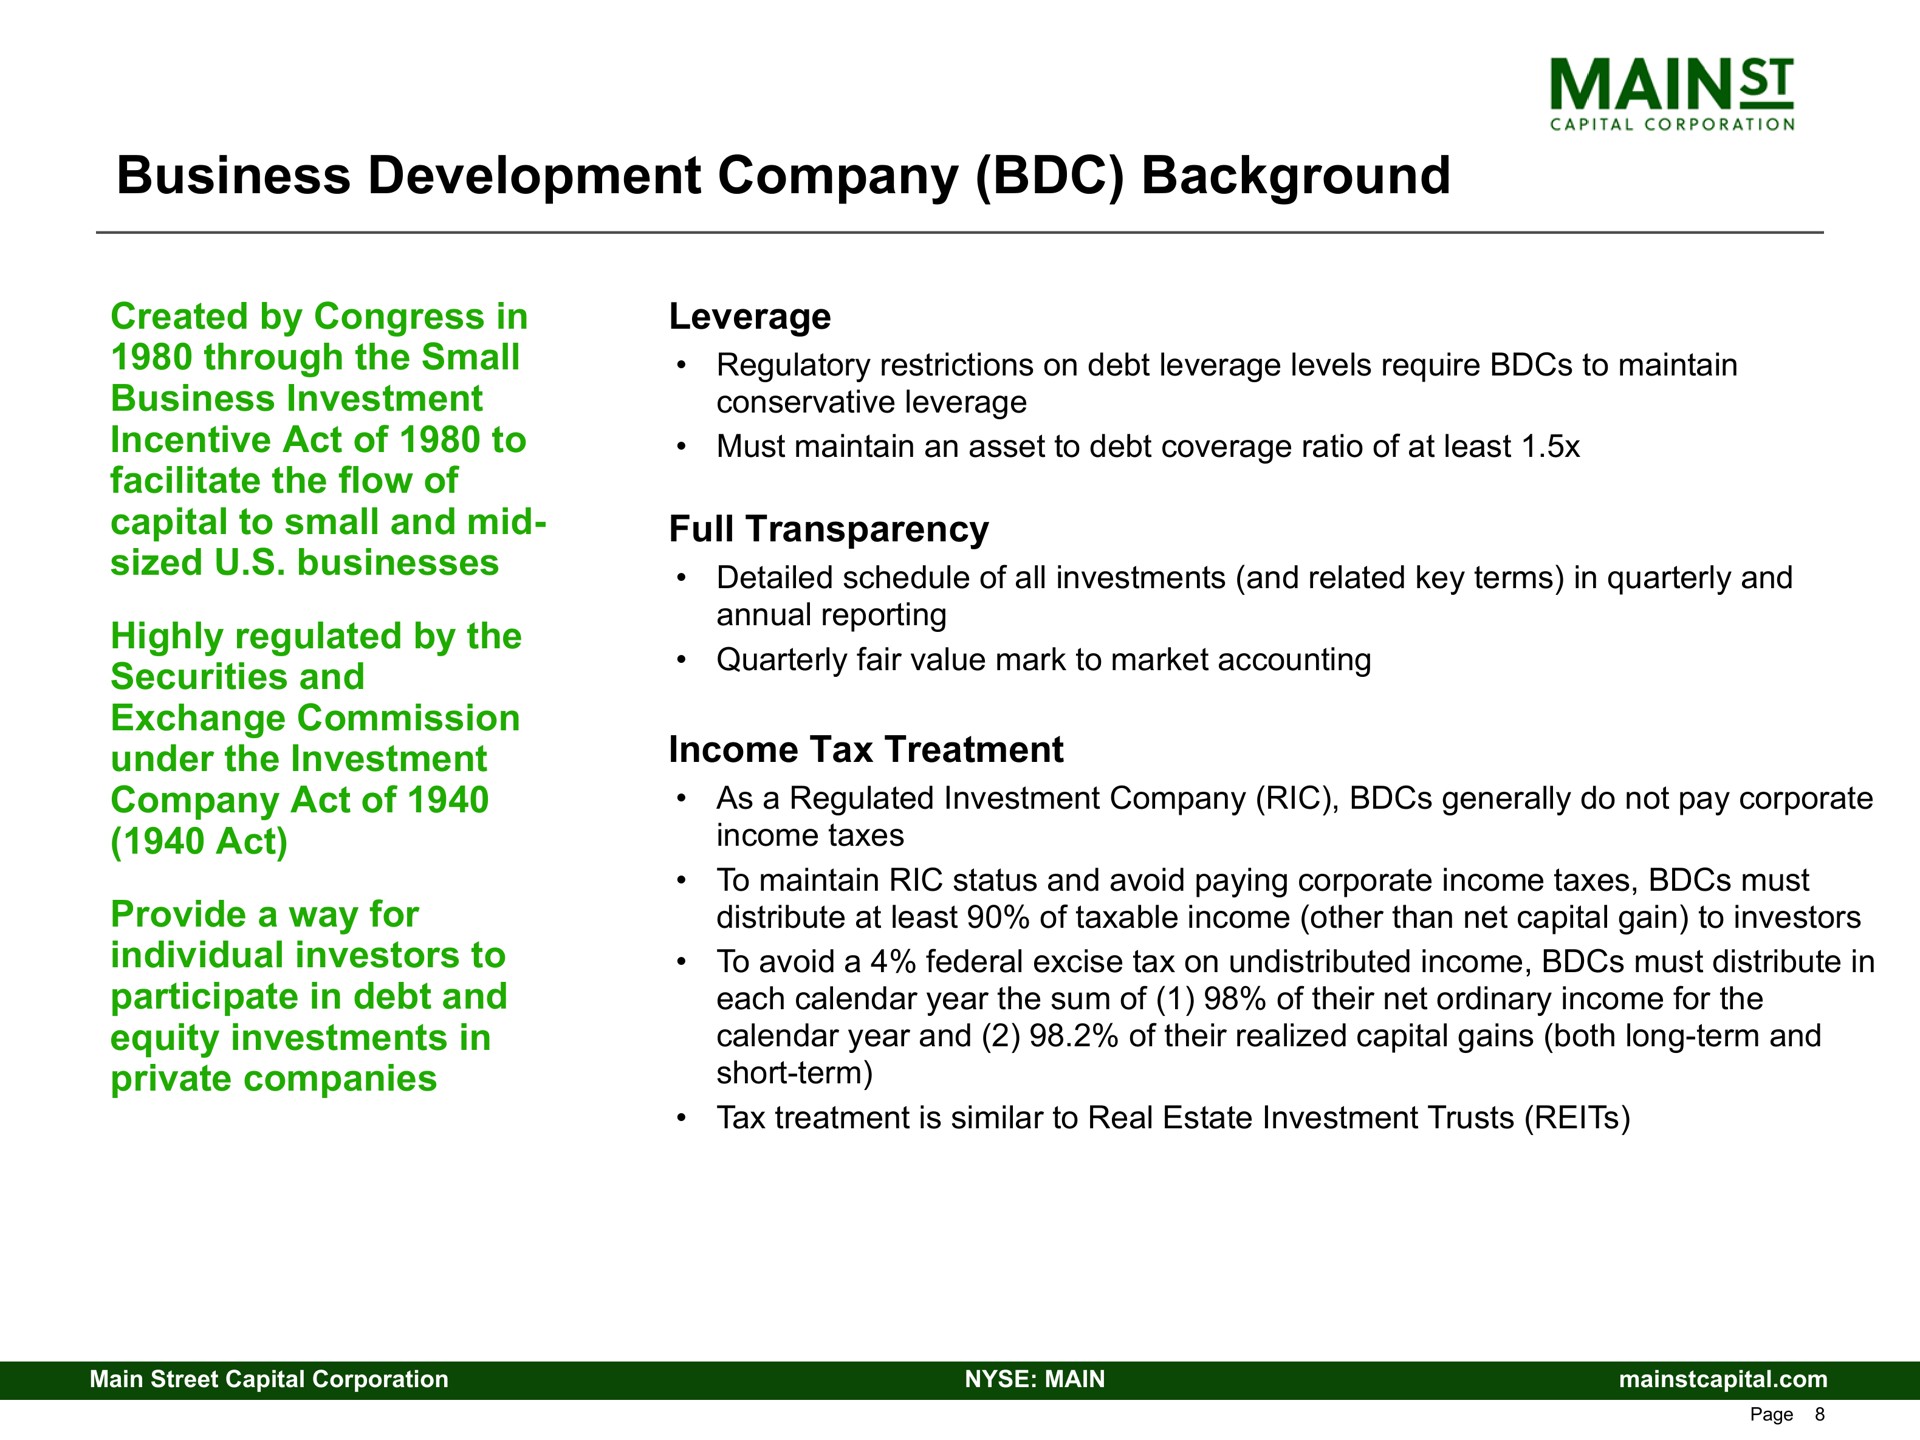 business development company background created by congress in through the small business investment incentive act of to facilitate the flow of capital to small and mid sized businesses highly regulated by the securities and exchange commission under the investment company act of act provide a way for individual investors to participate in debt and equity investments in private companies leverage full transparency income tax treatment | Main Street Capital